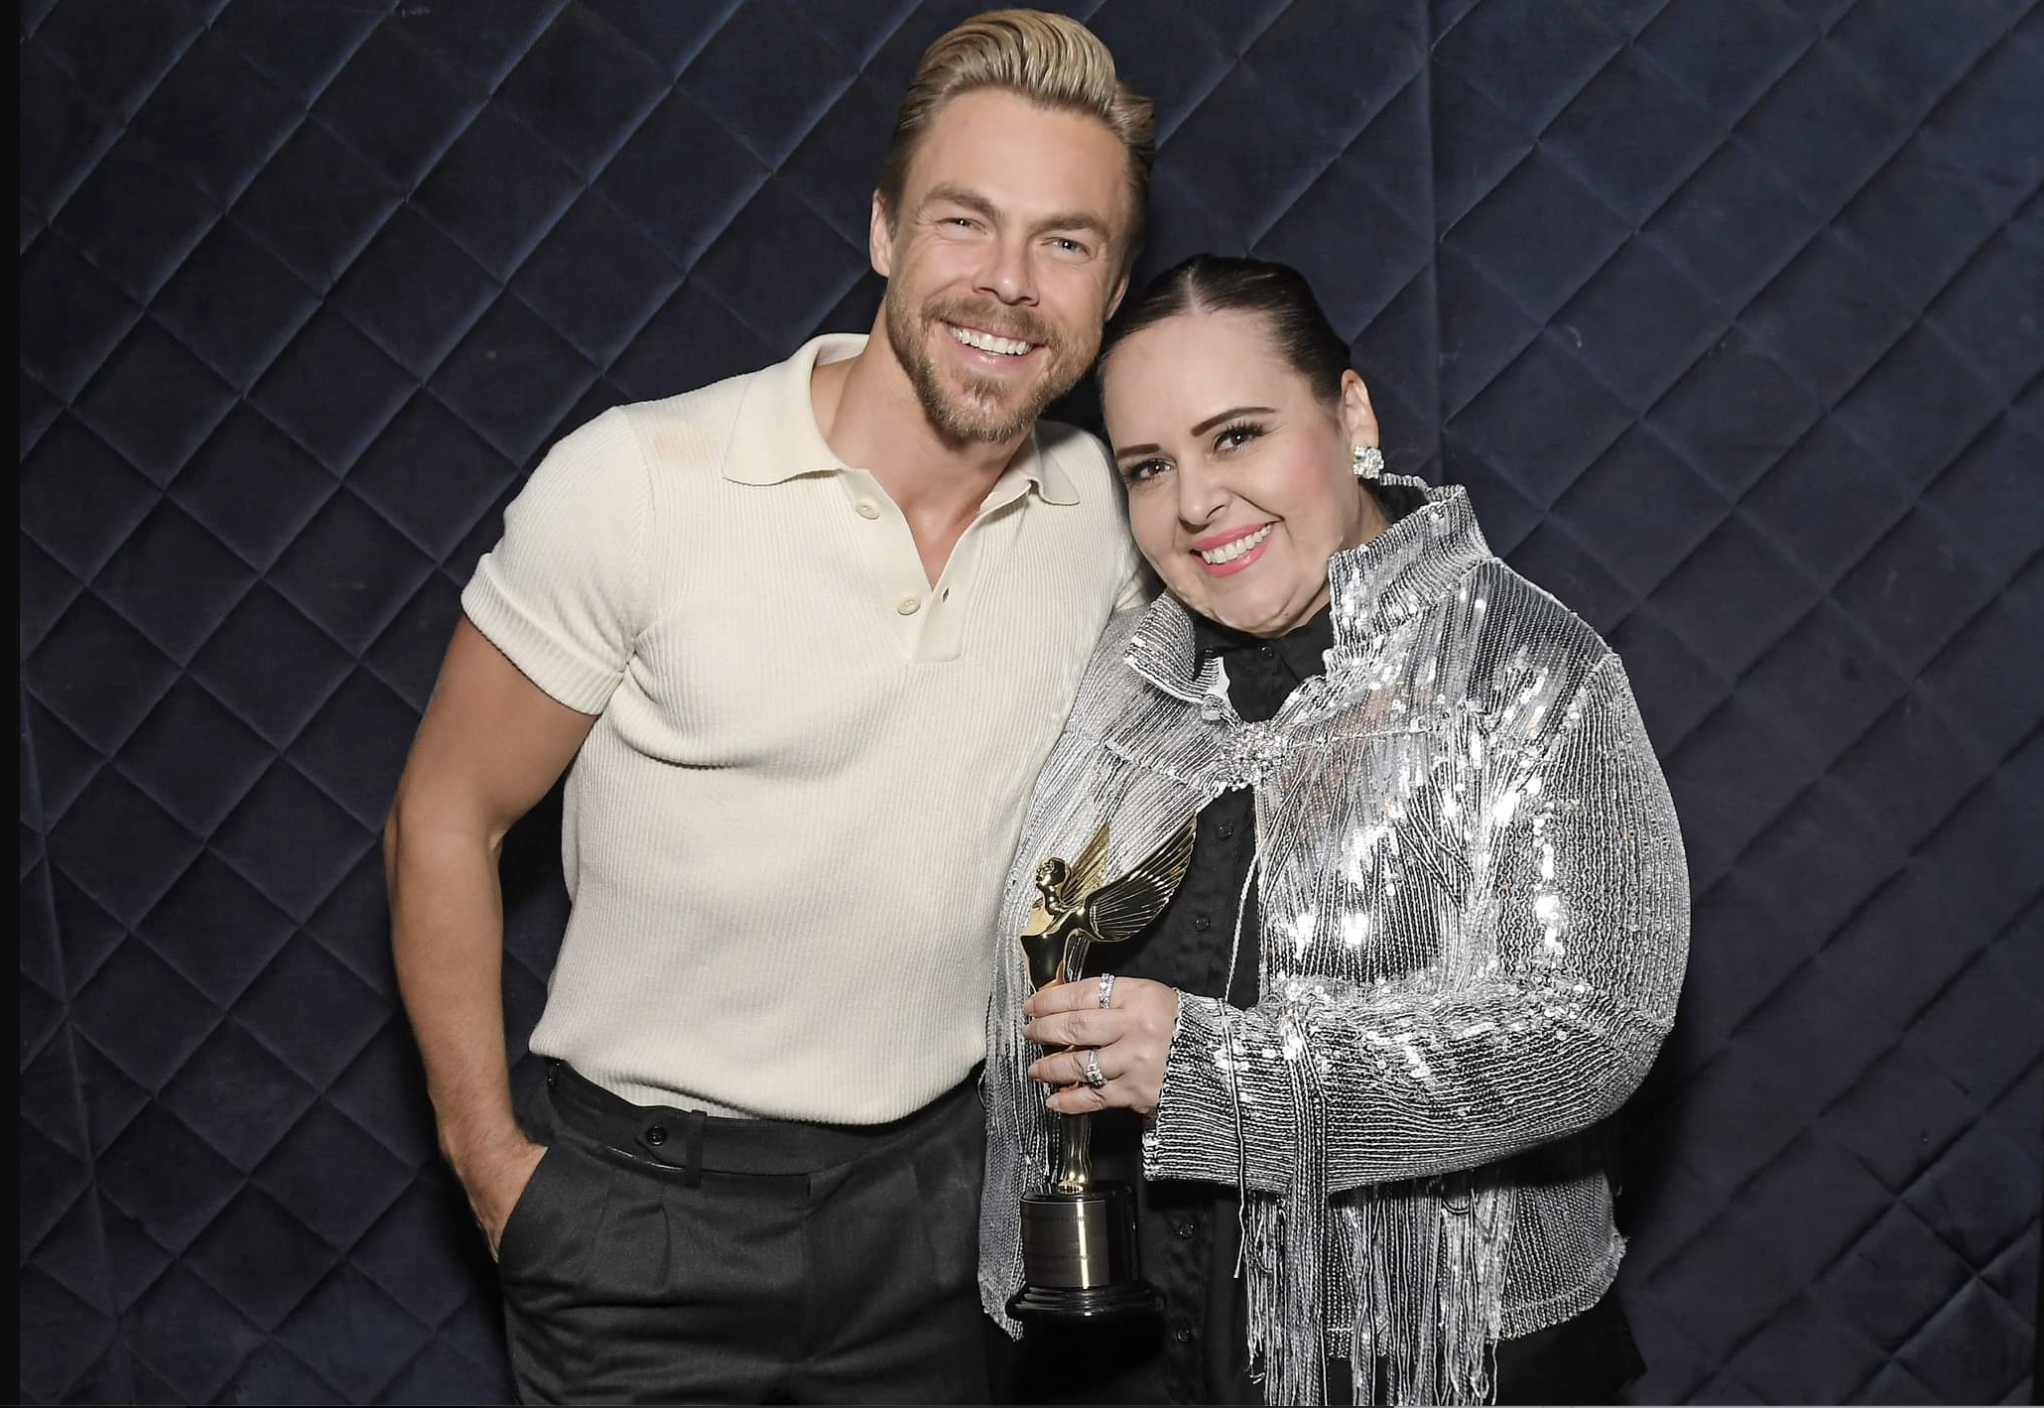 A man in a white shirt stands with a woman in a sparkly silver coat who is holding an award statuette.